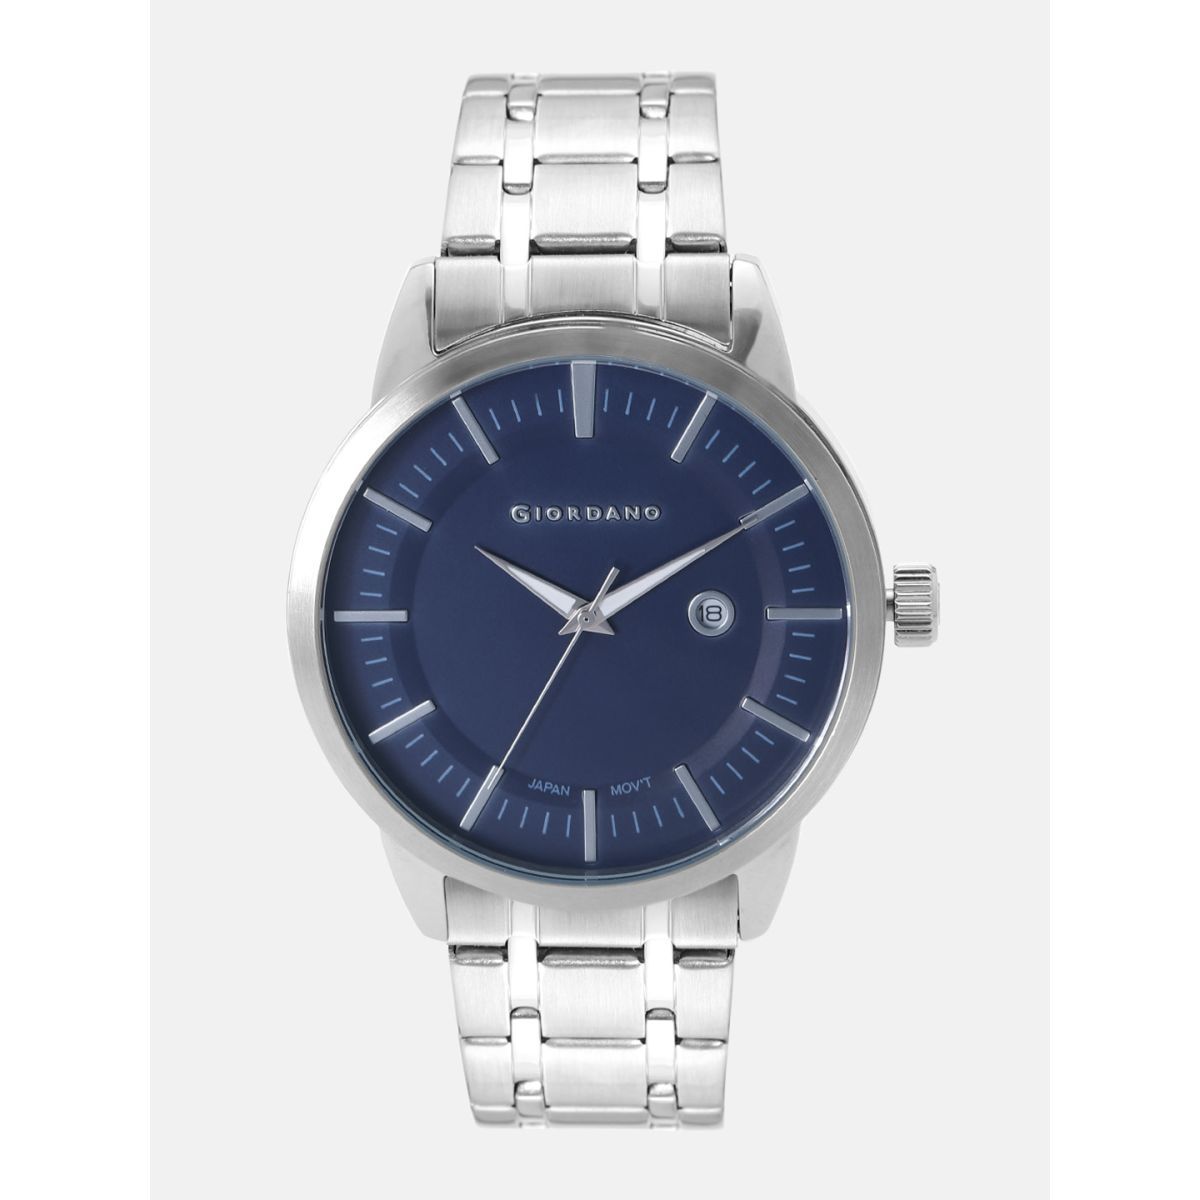 Buy Giordano A2060-22 Analog Watch for Women at Best Price @ Tata CLiQ